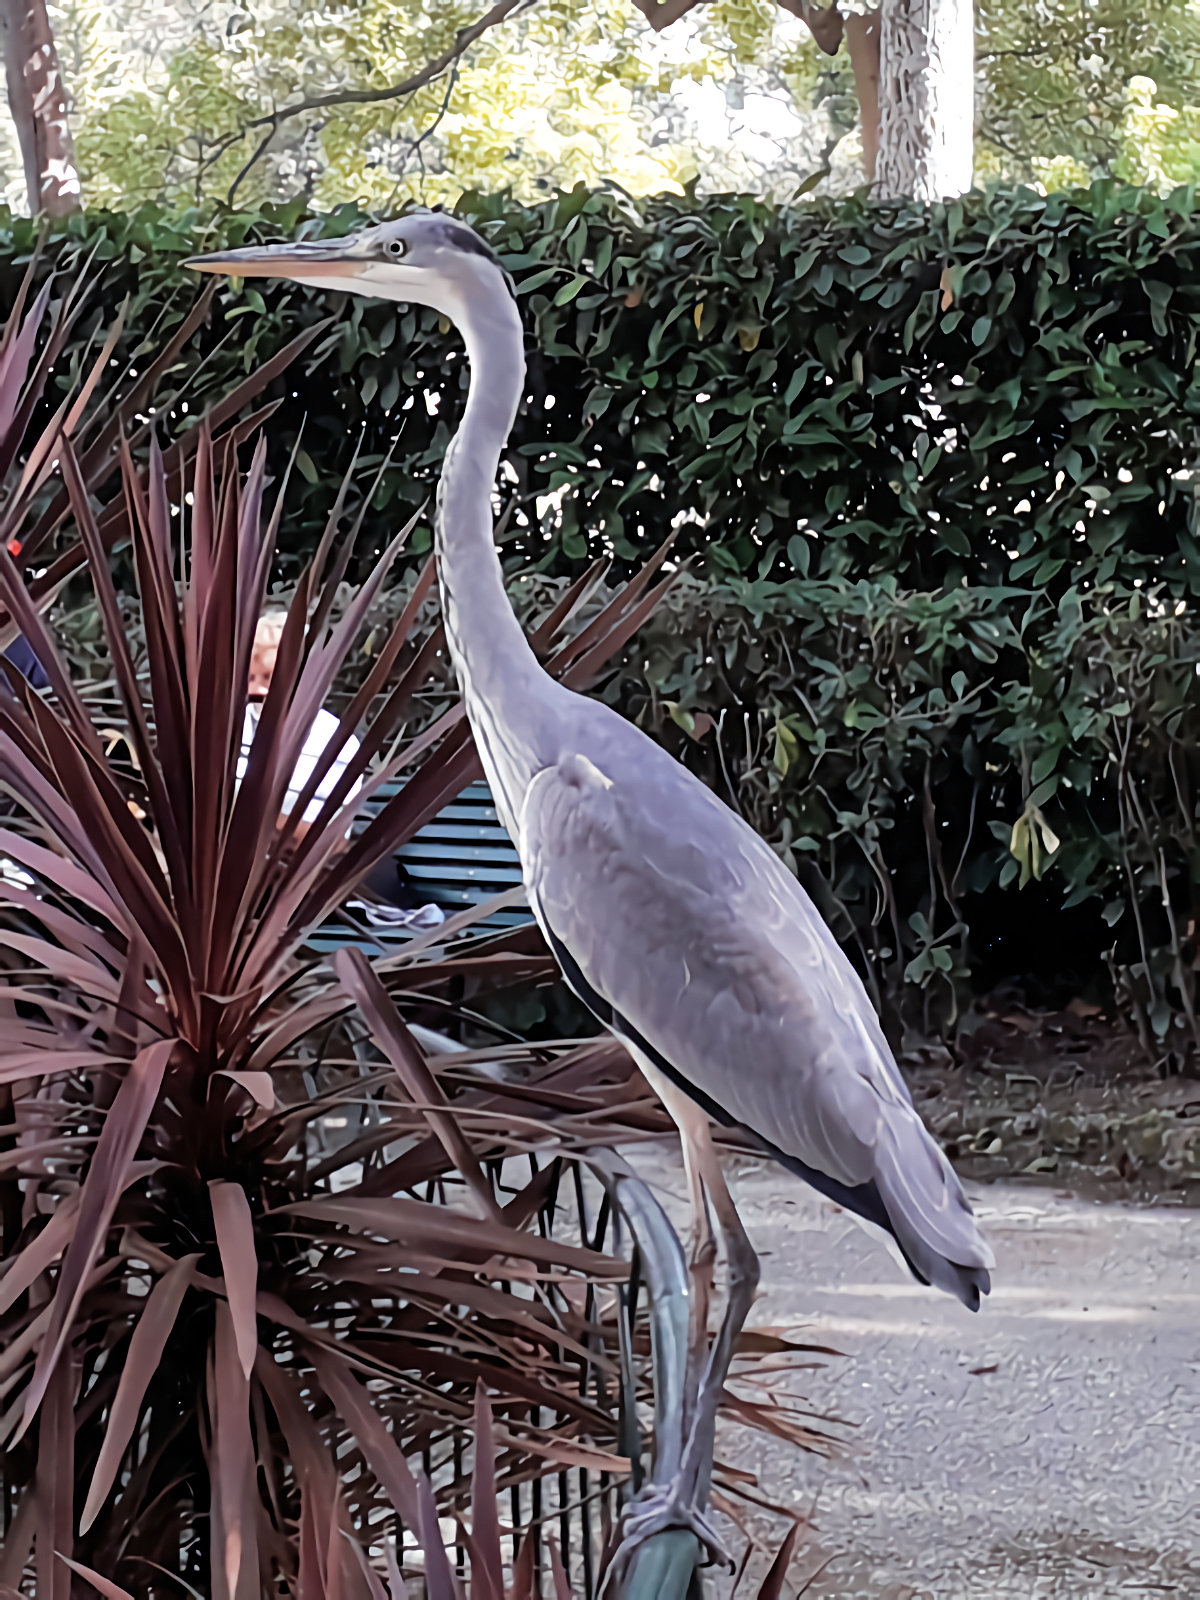 A heron at the Parks of Nervi...